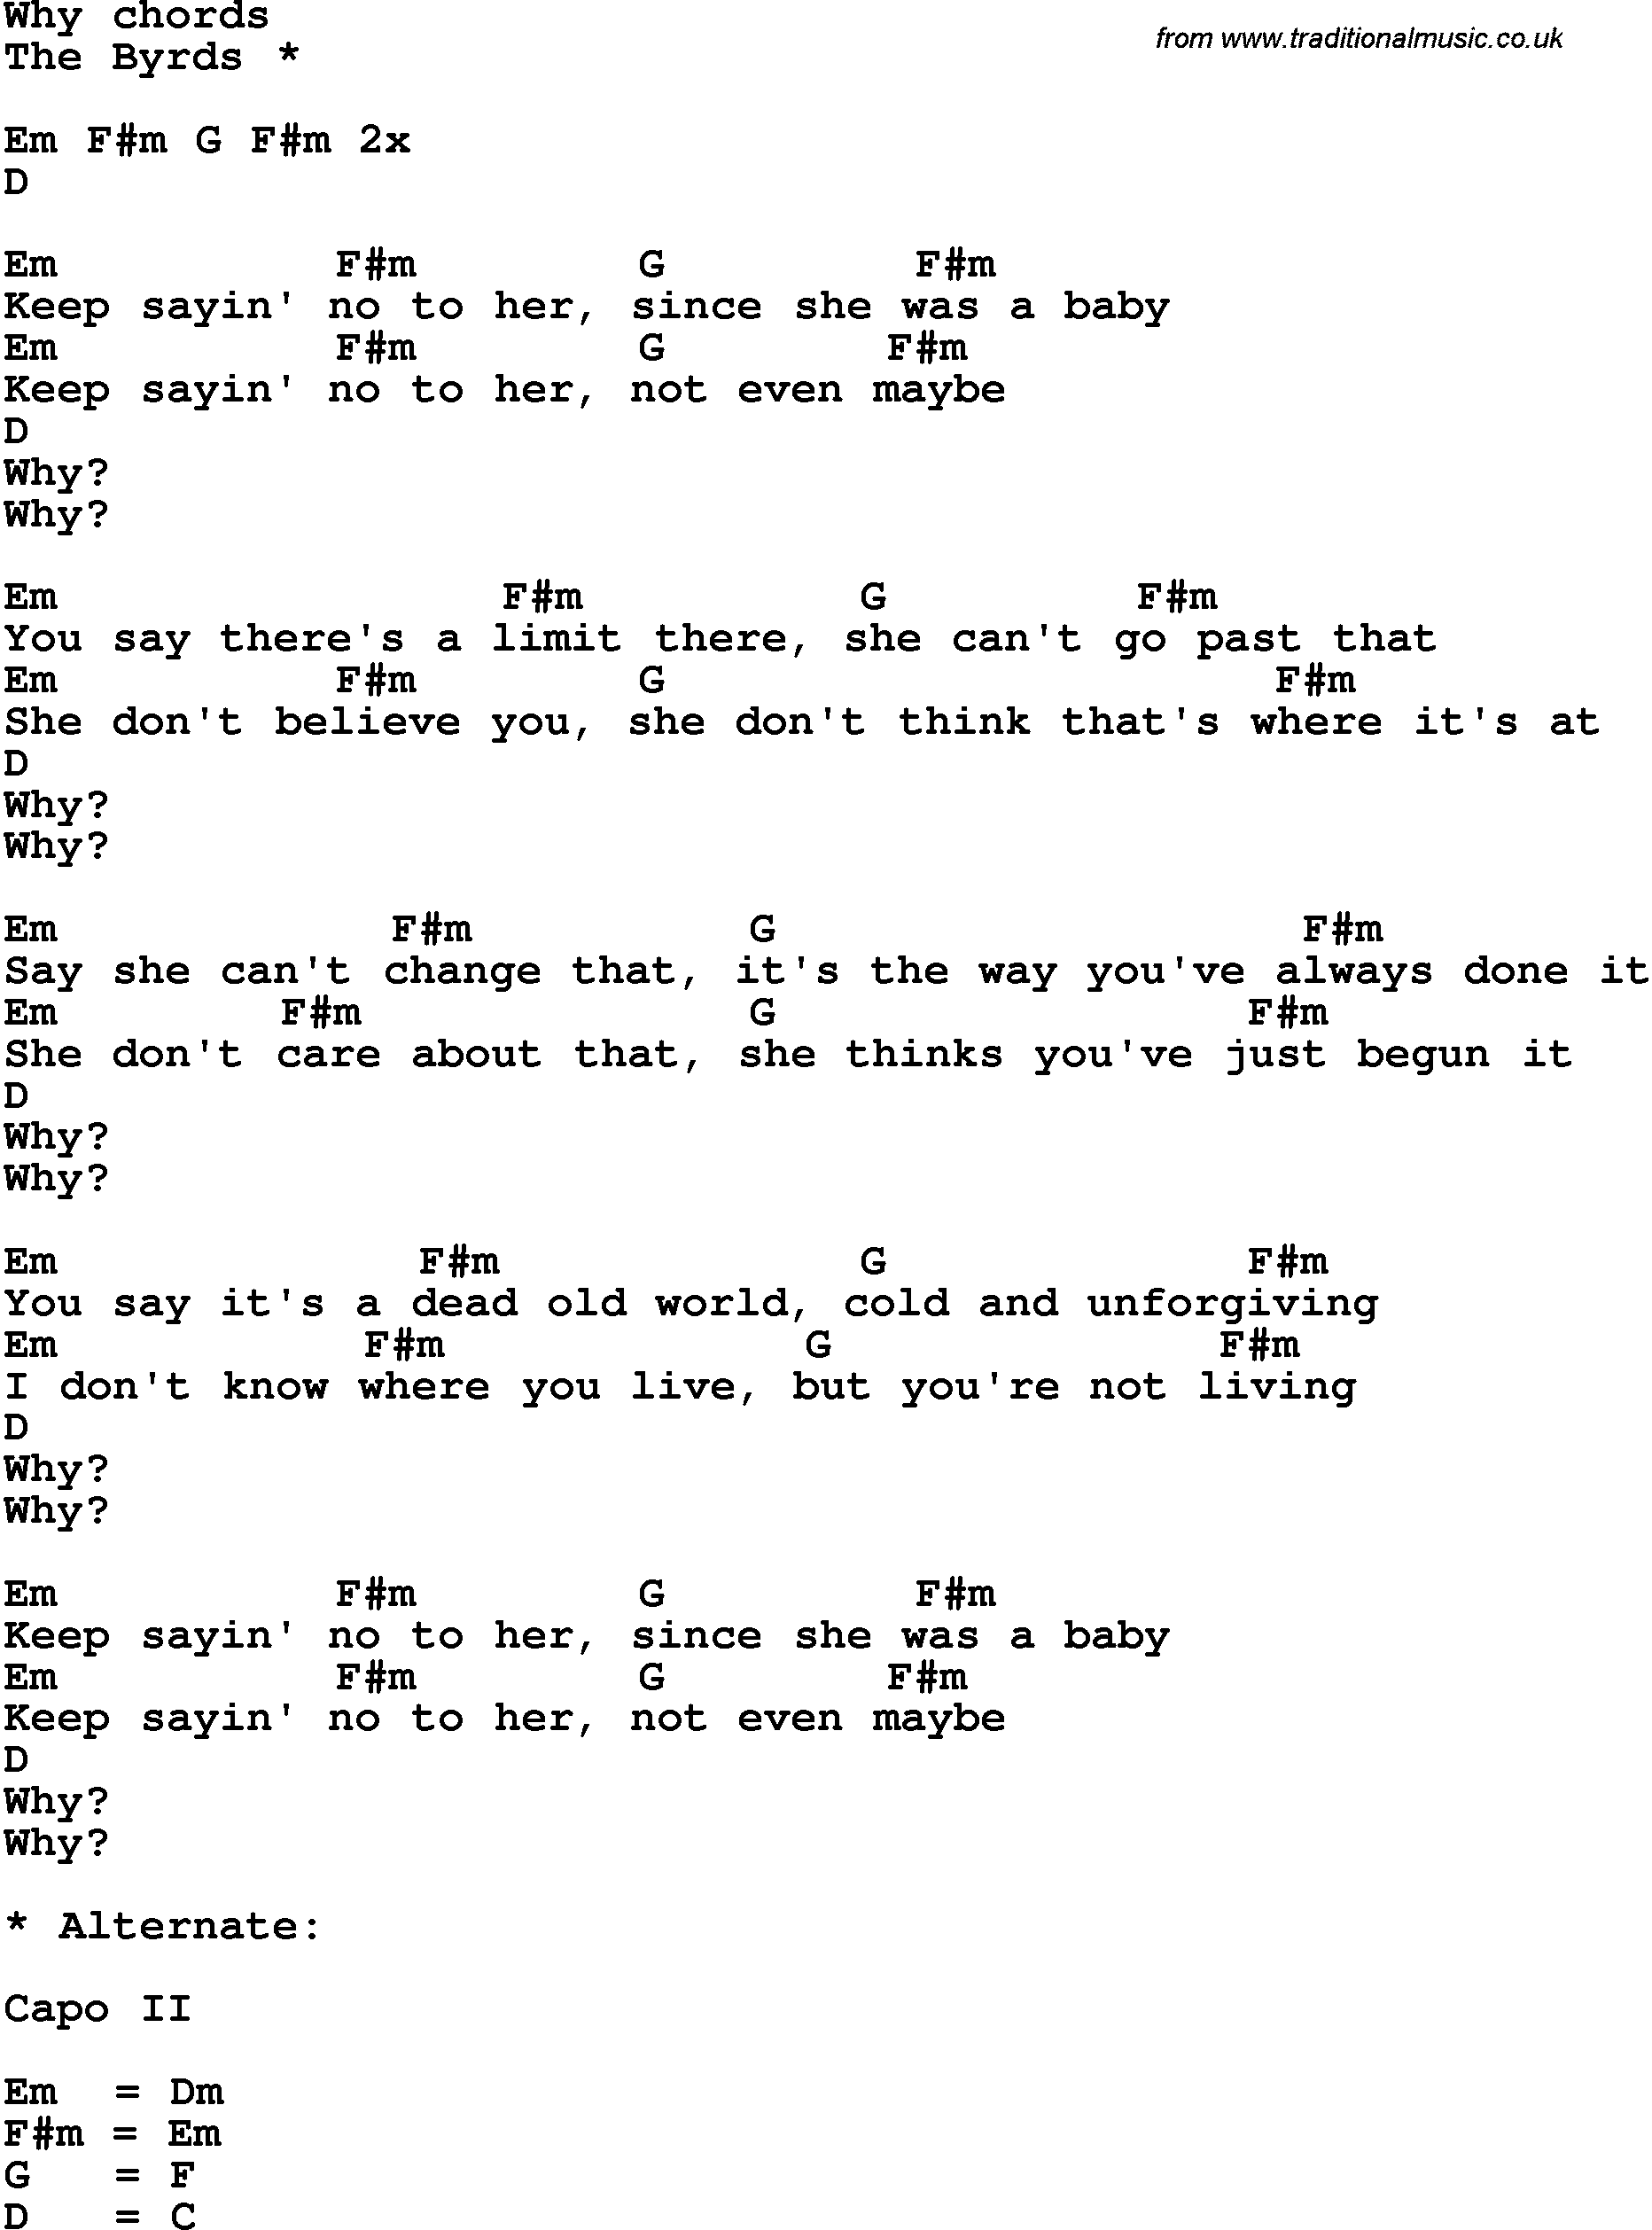 Song Lyrics with guitar chords for Why